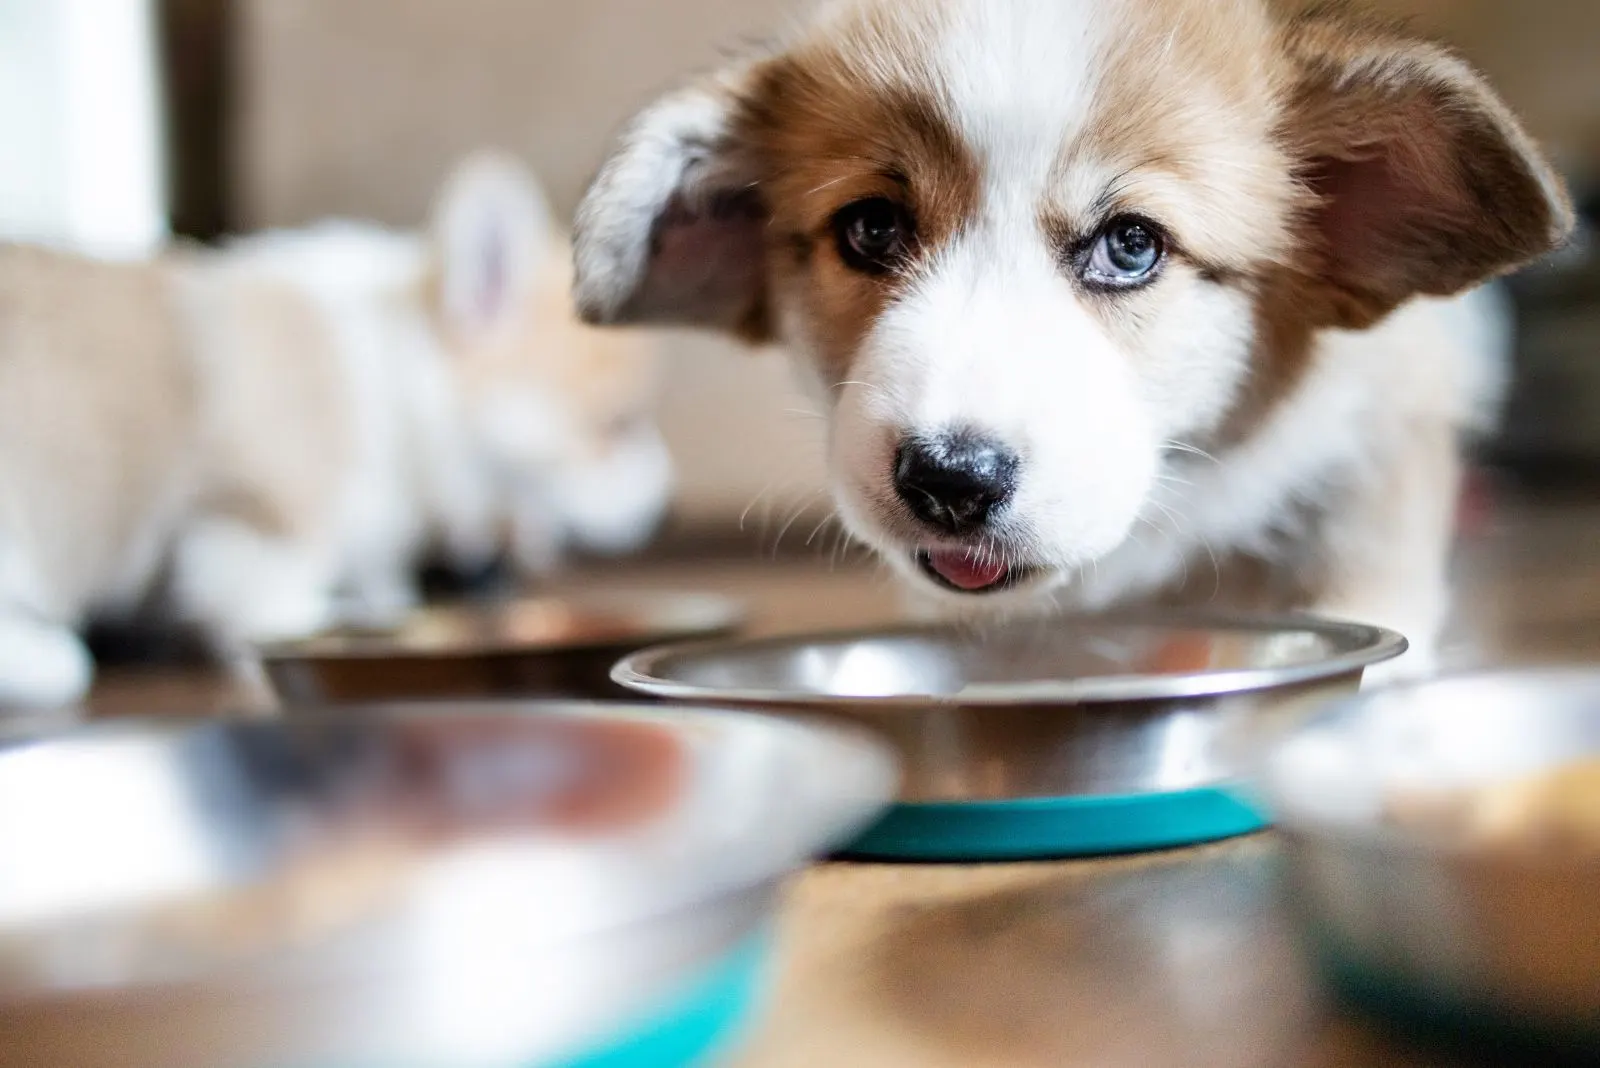 an adorable dog eats from a bowl